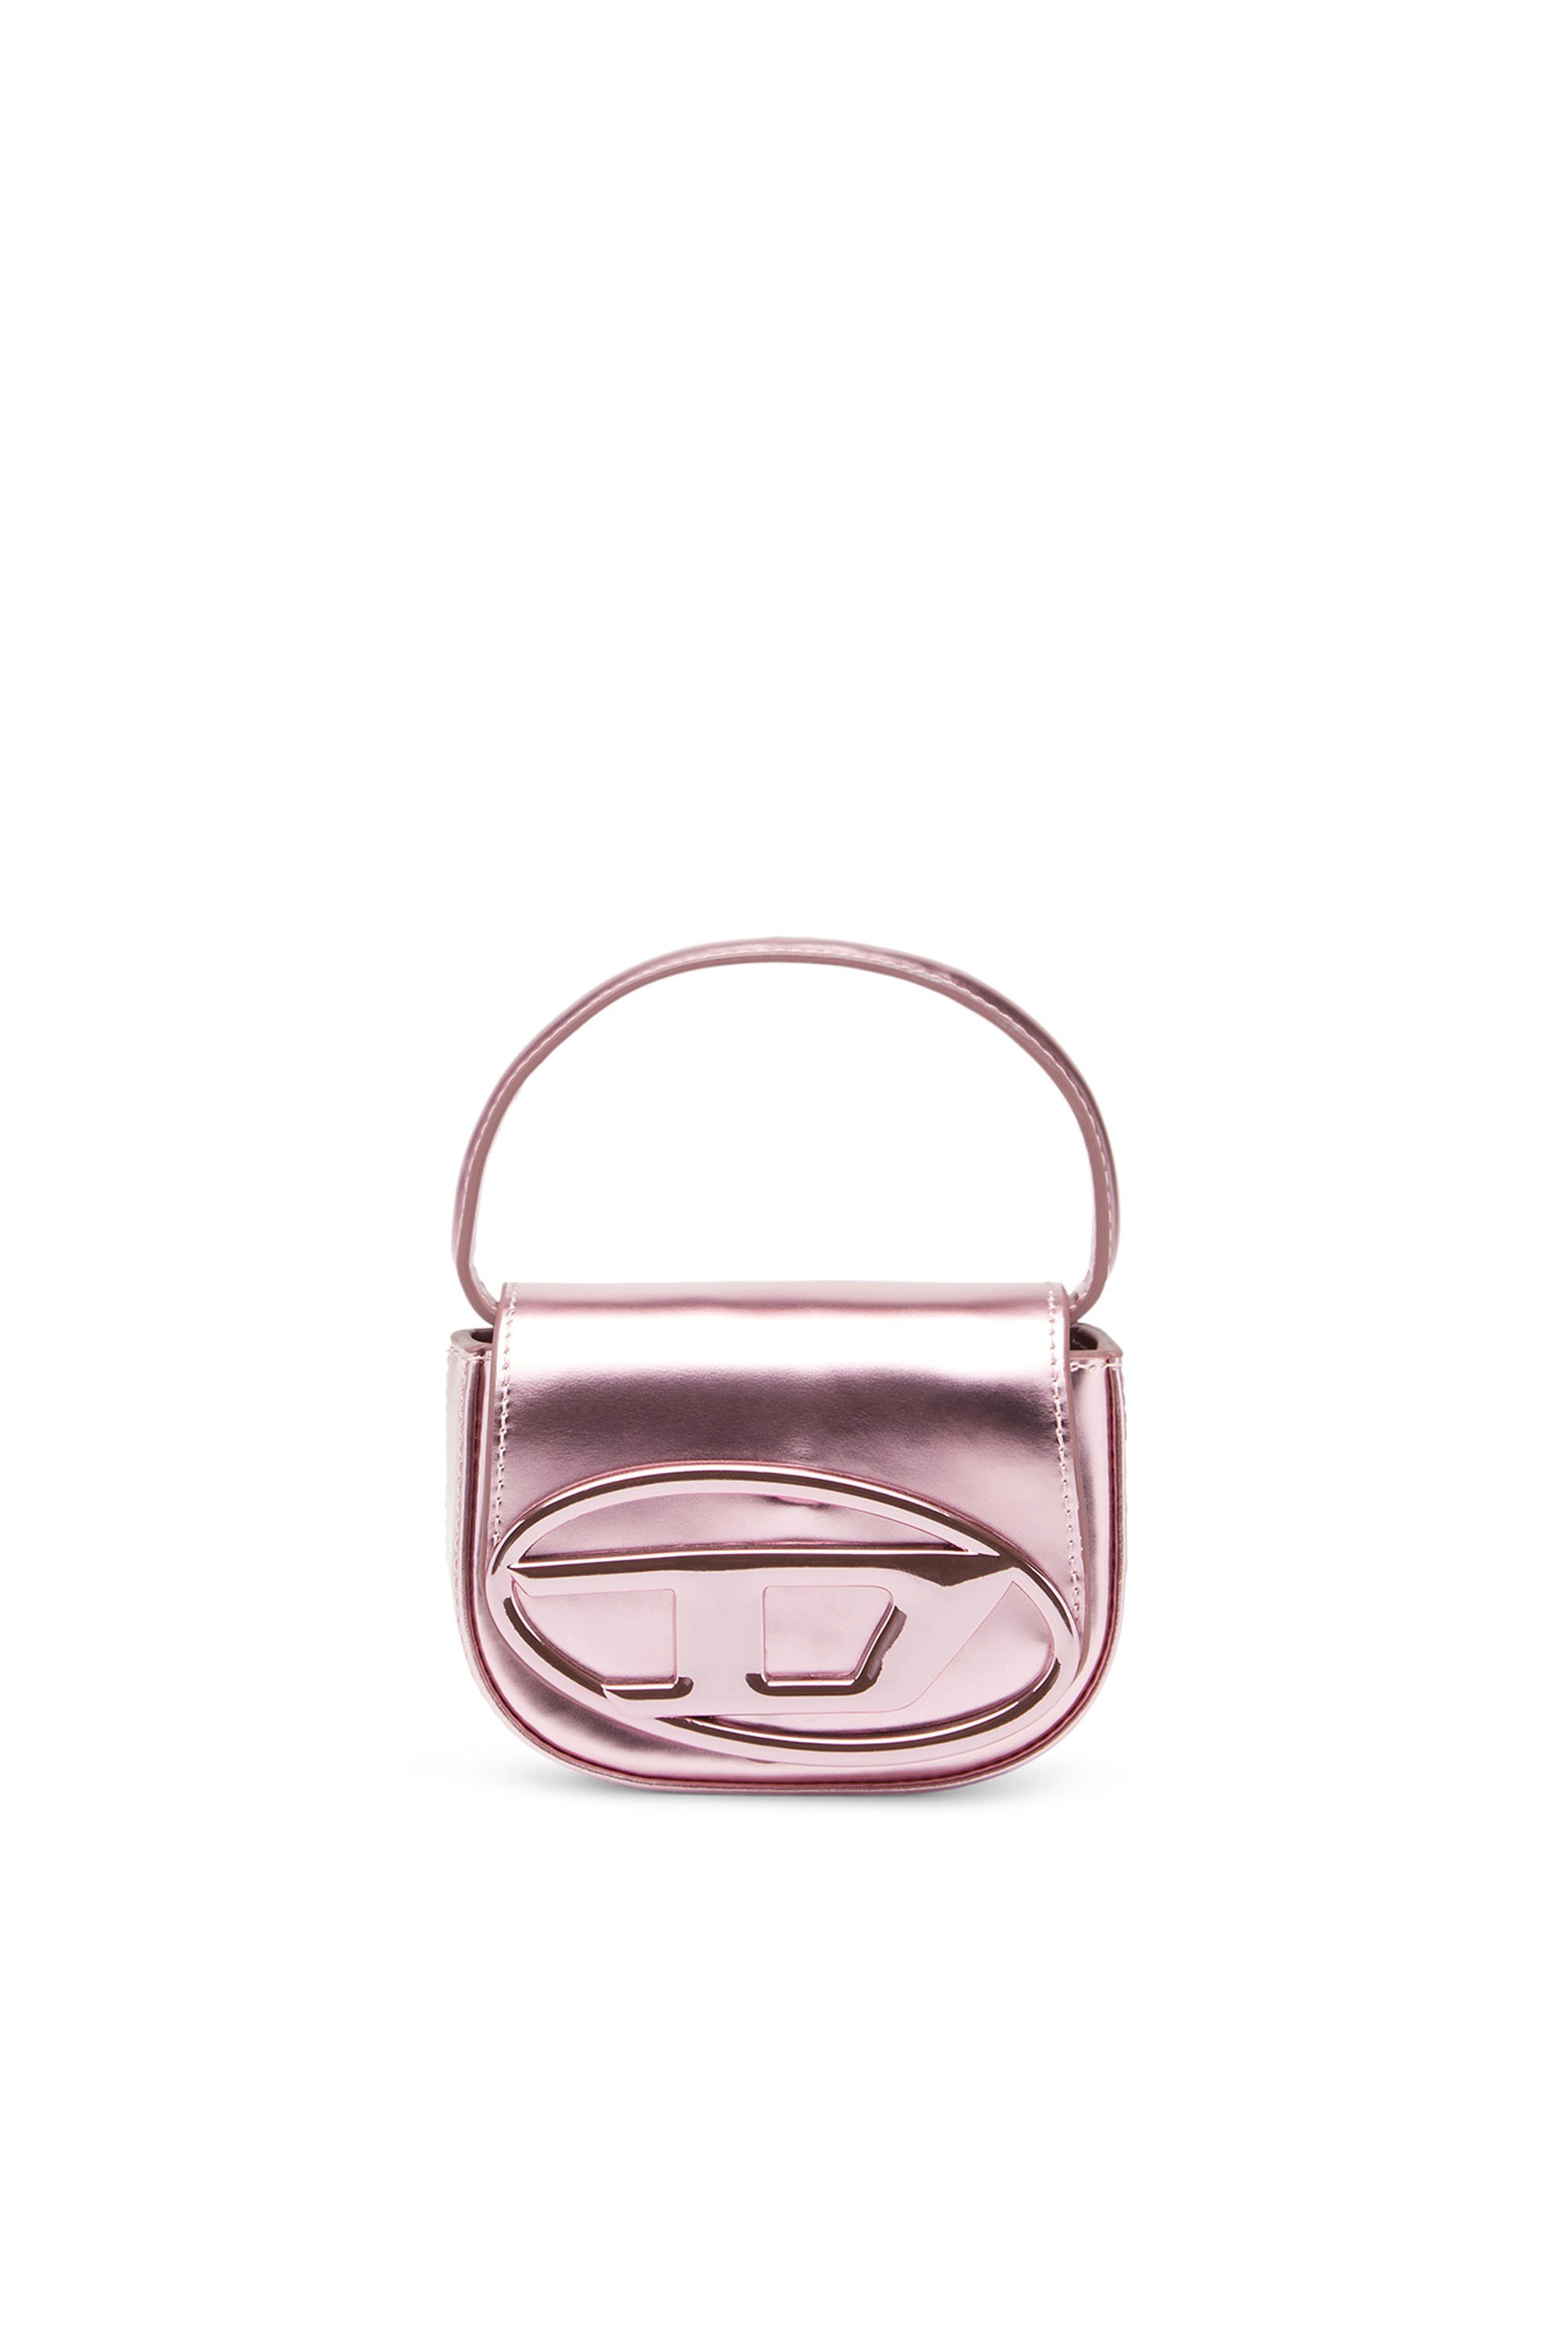 Diesel - 1DR-XS-S, Woman 1DR-XS-S-Iconic mini bag in mirrored leather in Pink - Image 1